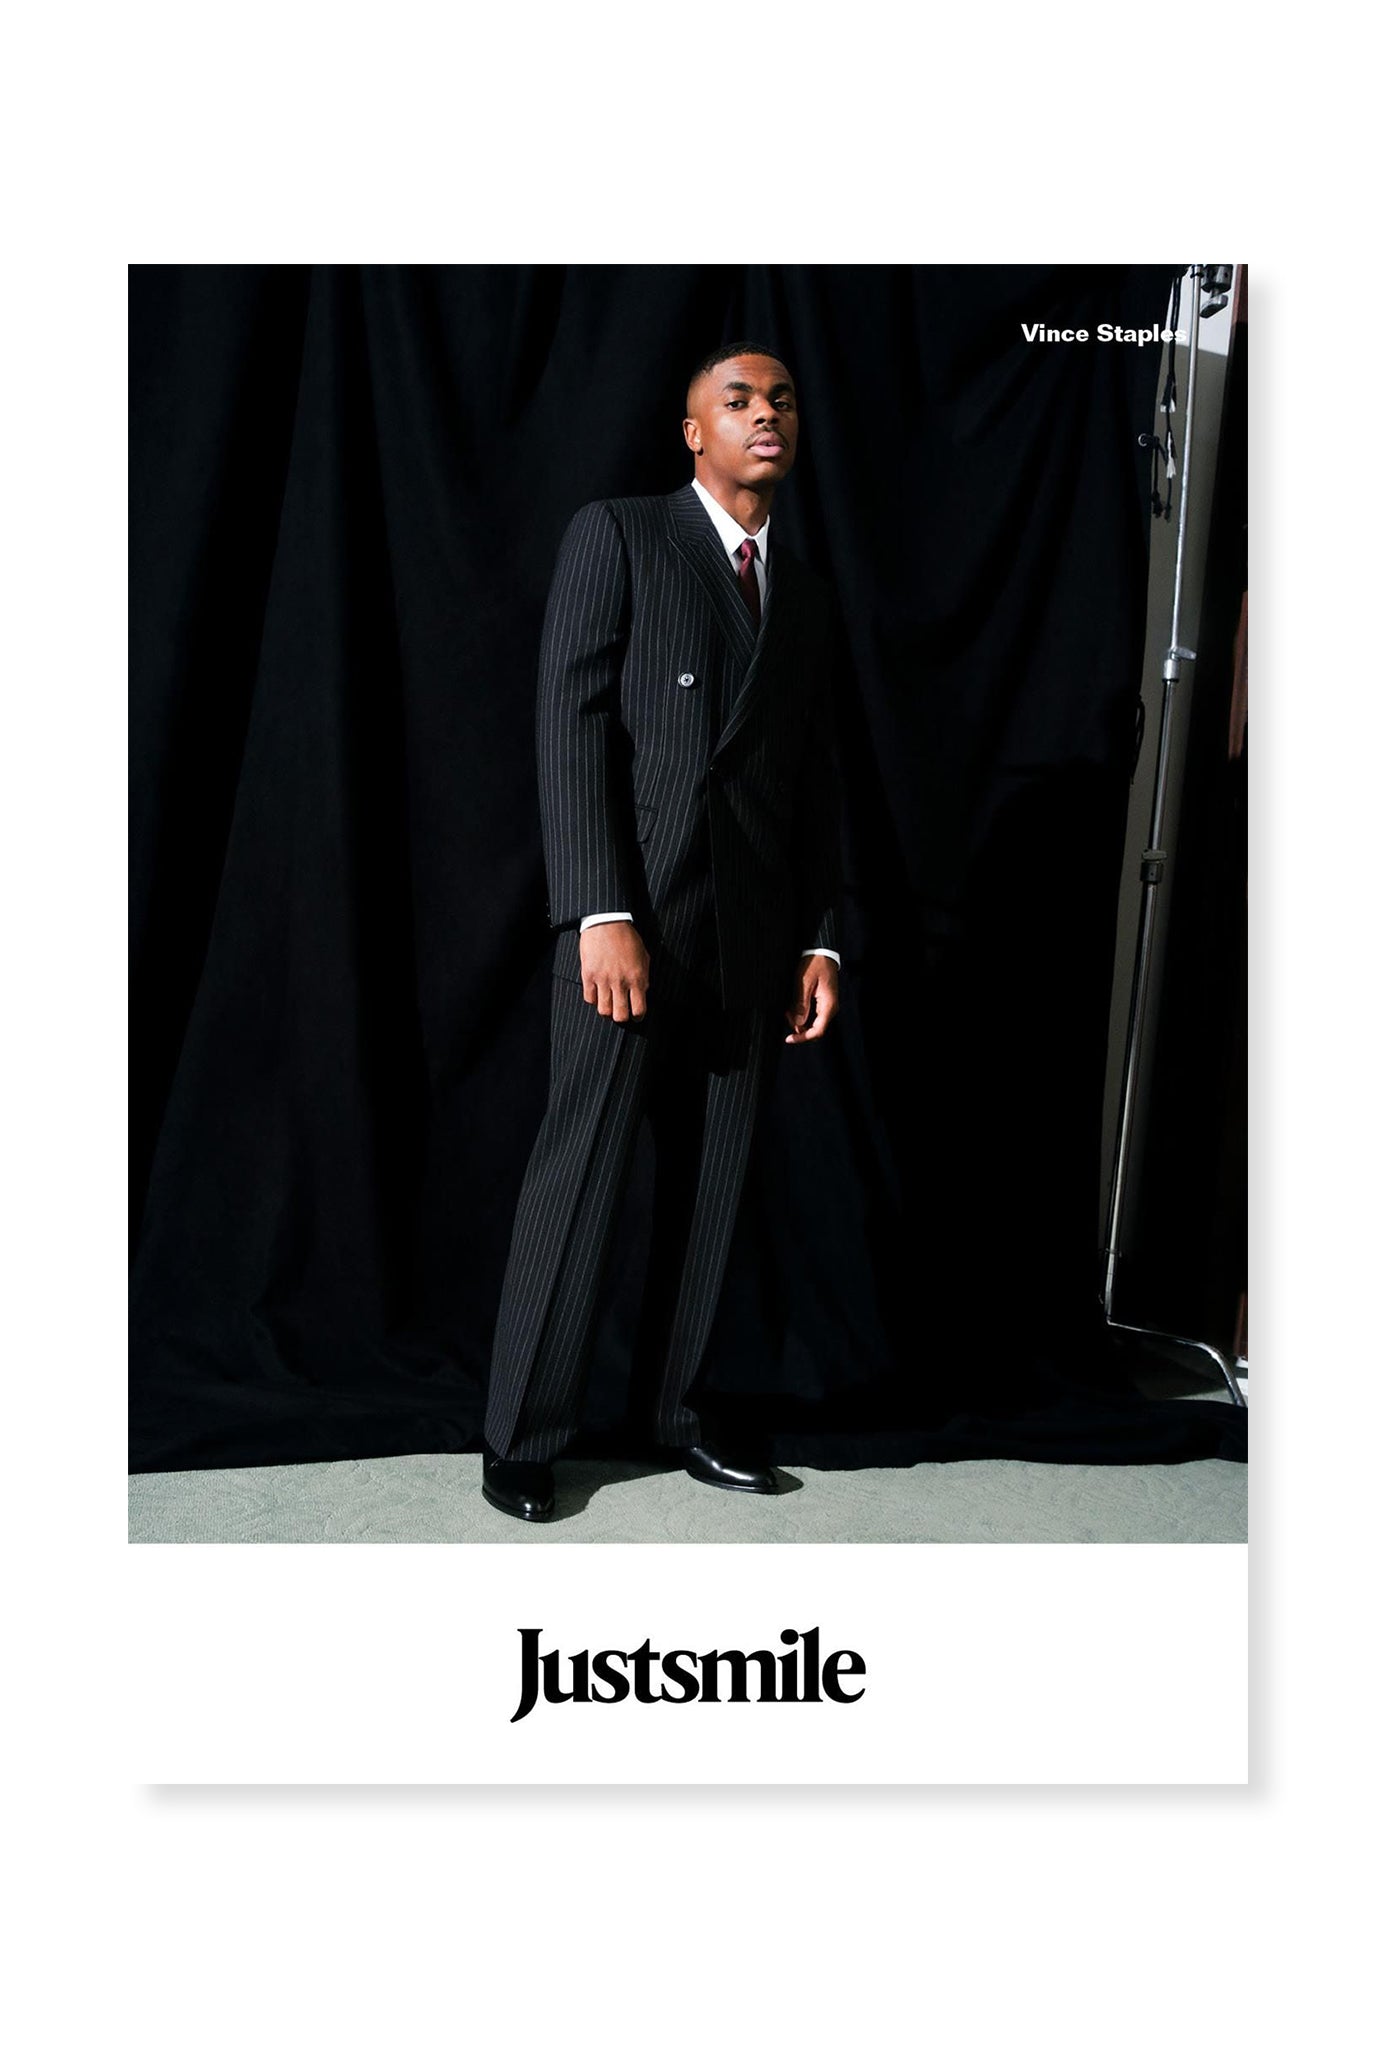 Justsmile, Issue 2